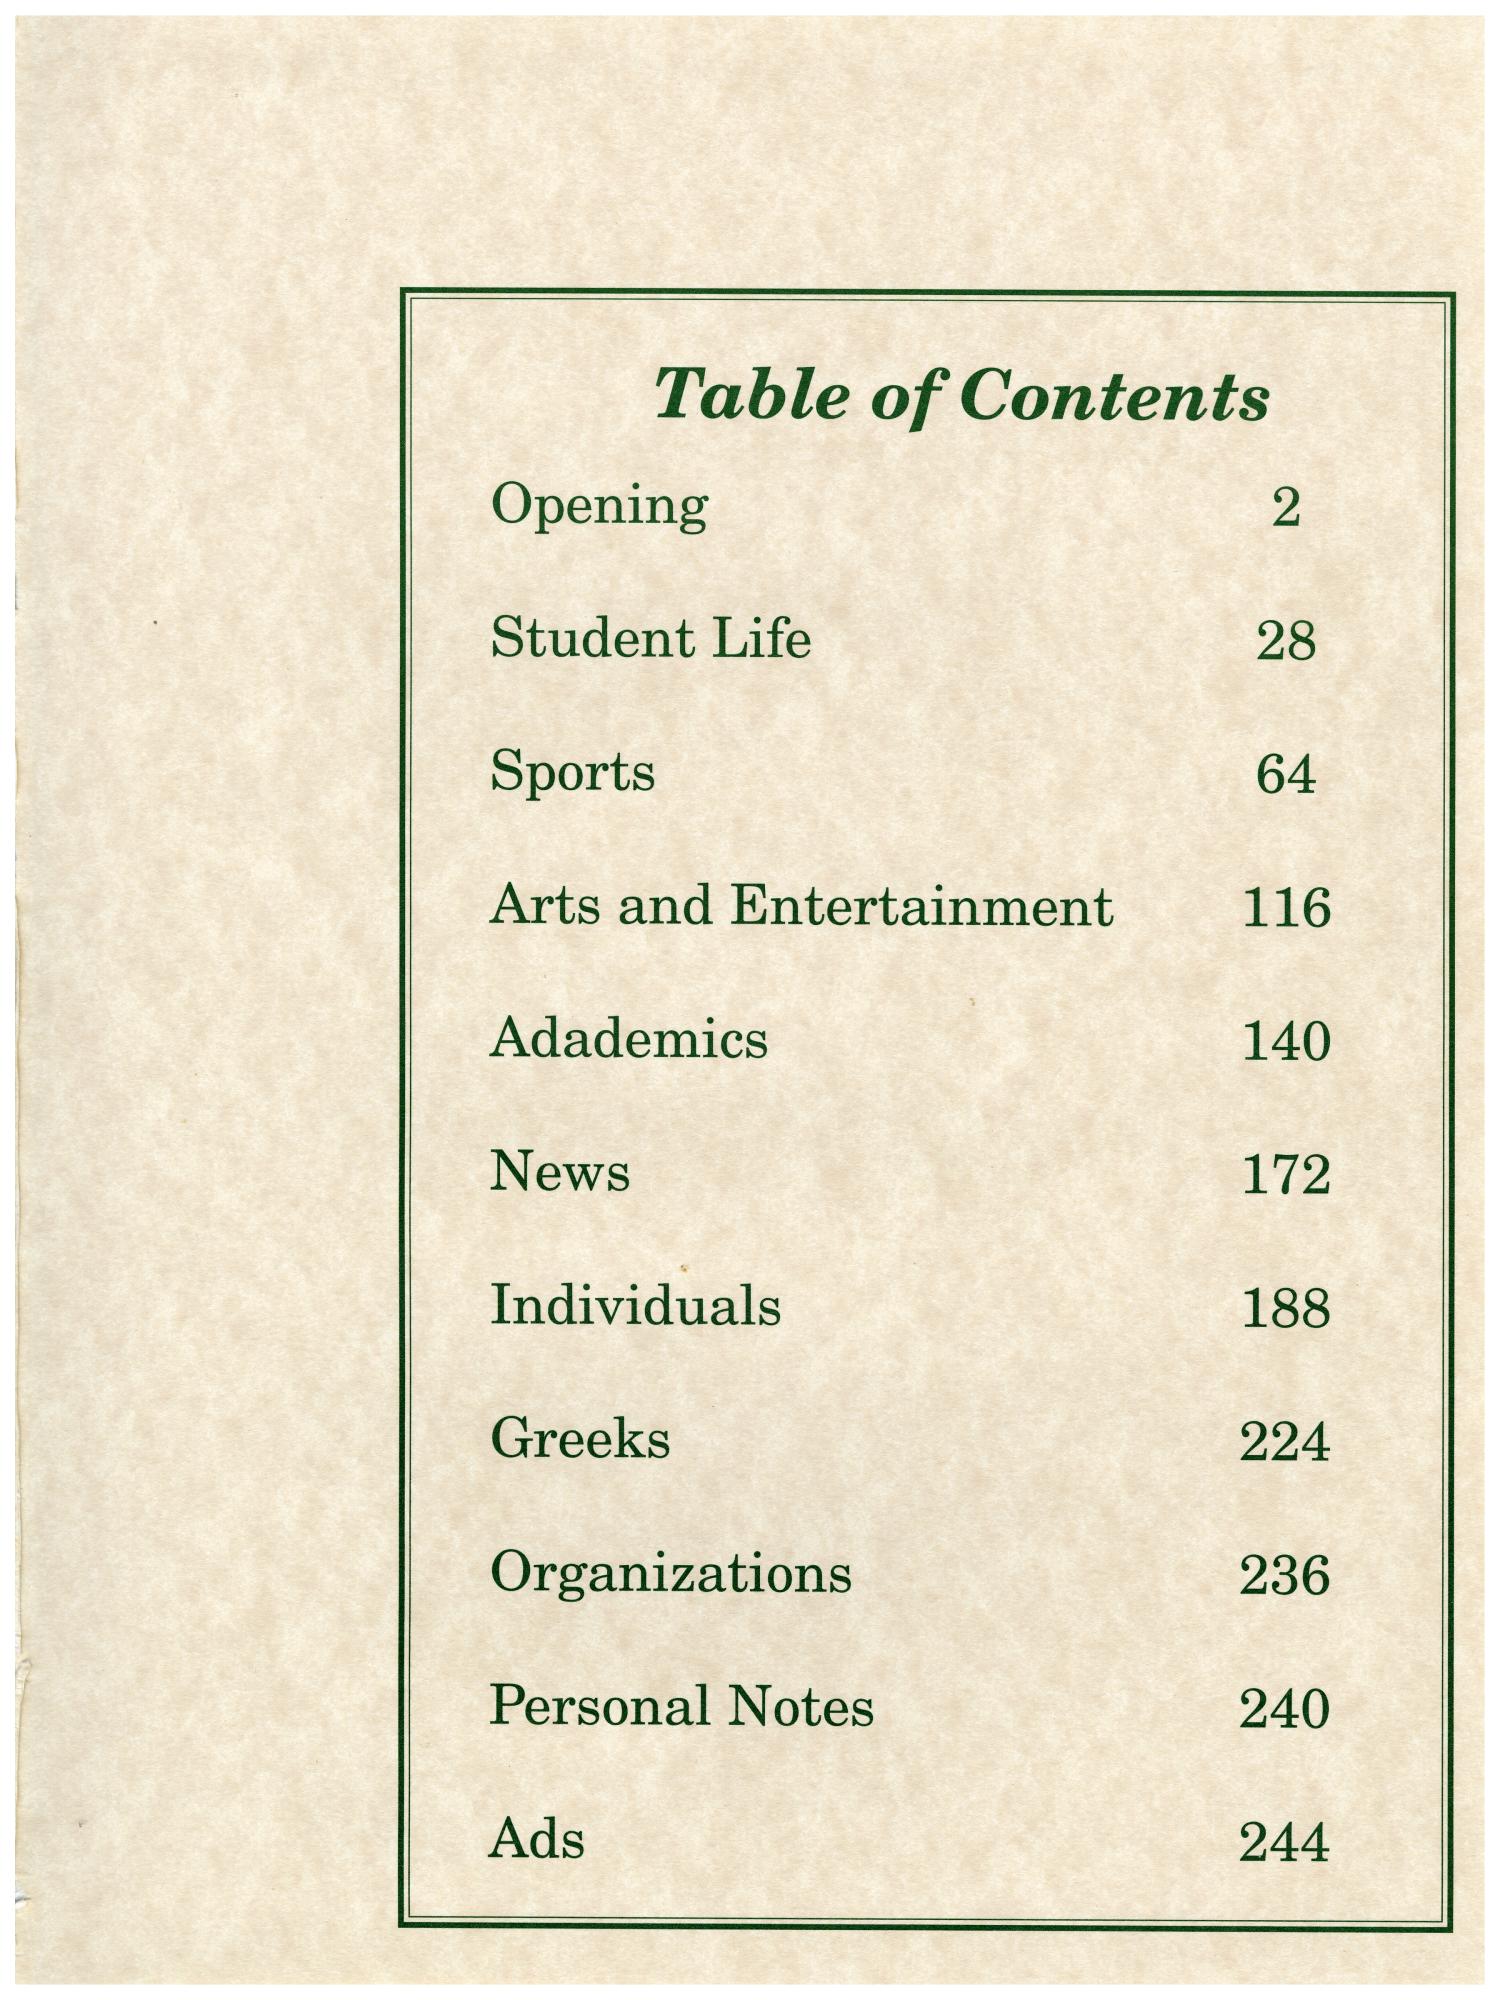 The Aerie, Yearbook of University of North Texas, 1996
                                                
                                                    None
                                                